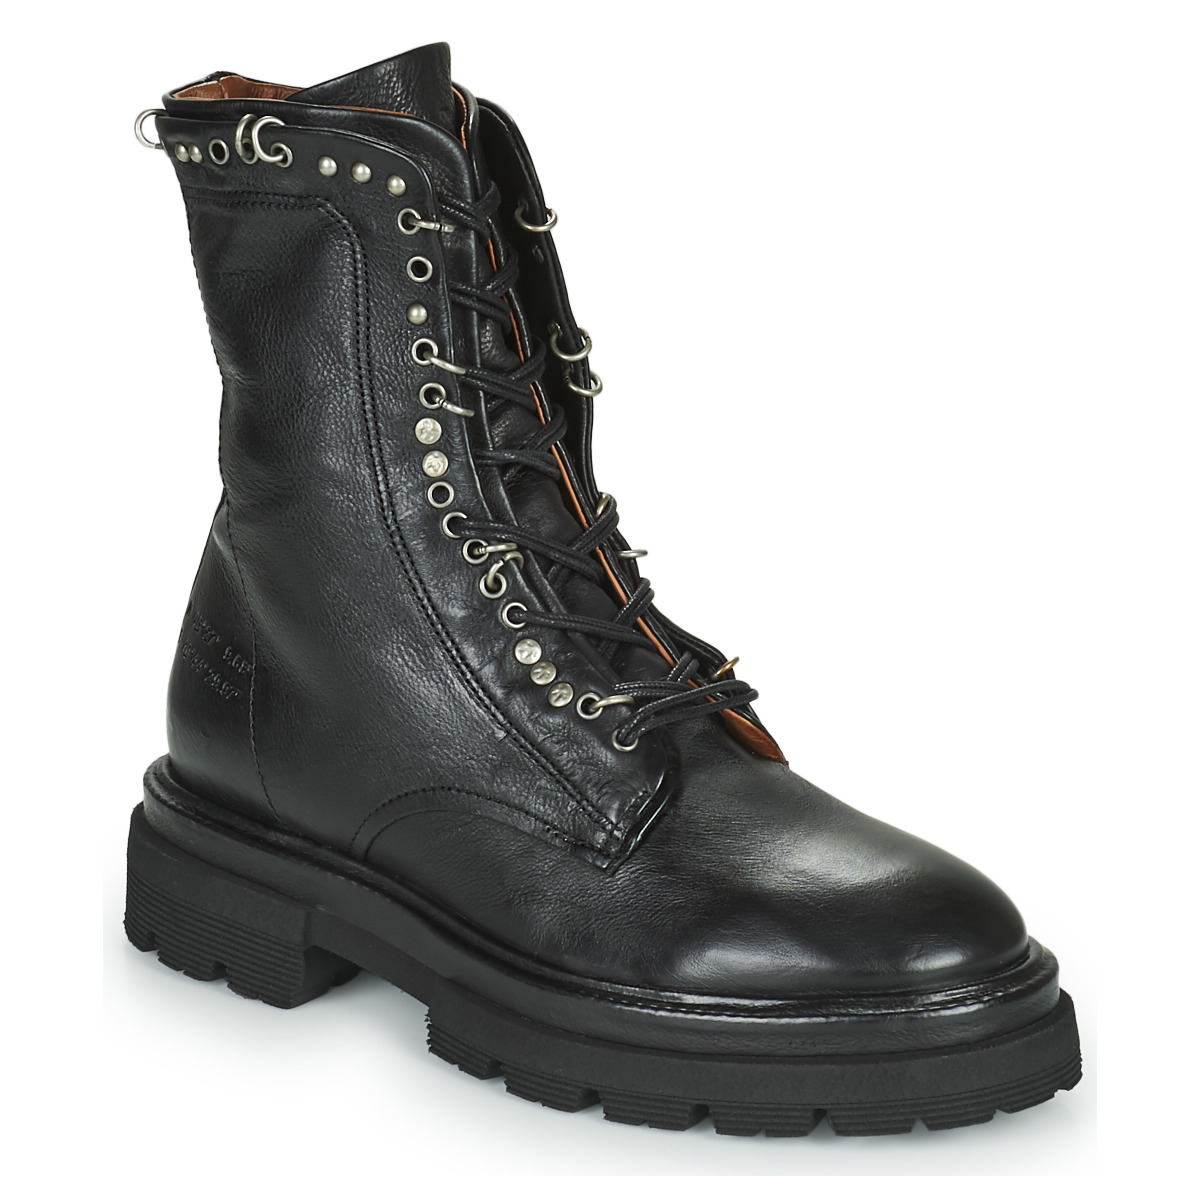 airstep / a.s.98  heaven lace  women's mid boots in black